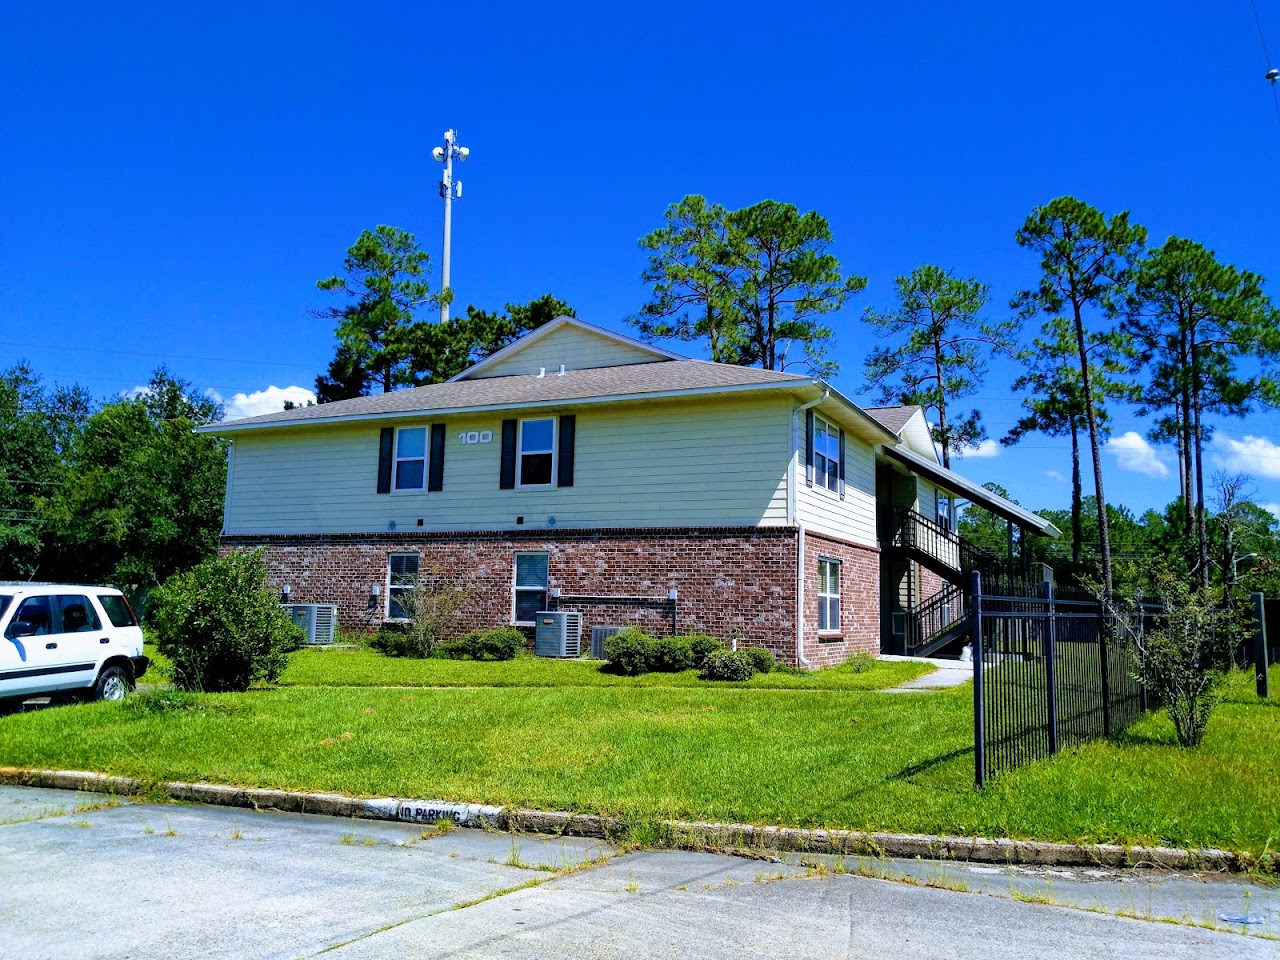 Photo of PINECREST MANOR. Affordable housing located at 1303 BLOOM PL WAVELAND, MS 39576